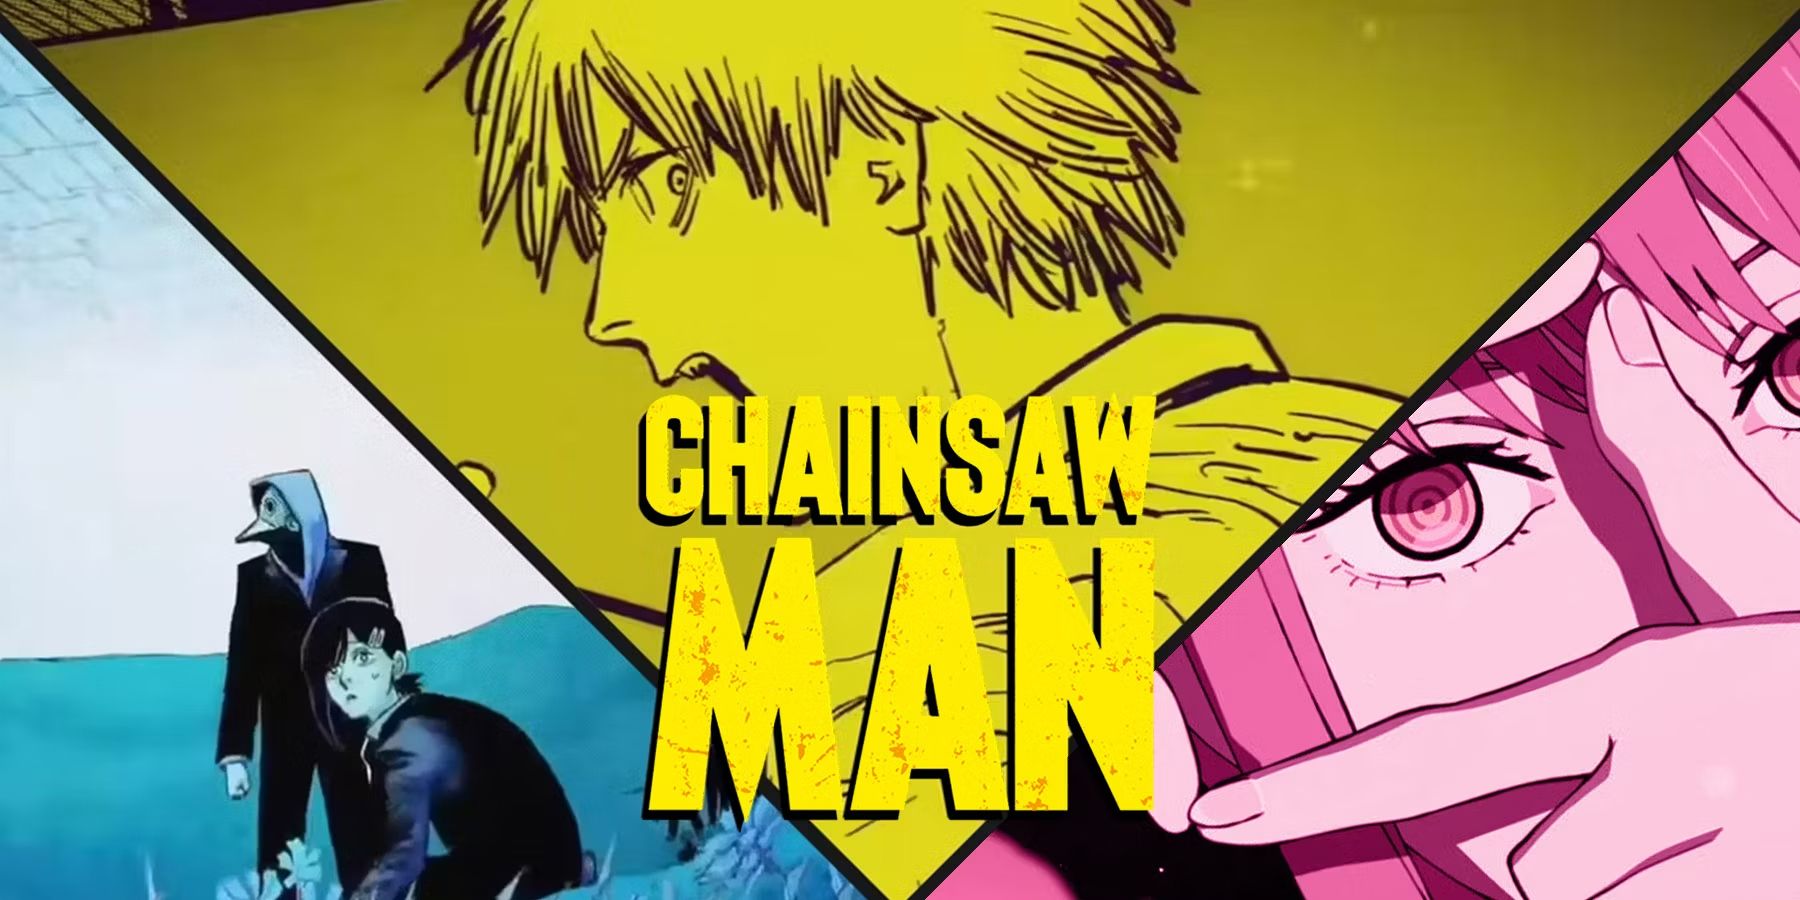 Chainsaw Man' Episode 9 Preview: Tokyo Special Division 4 May